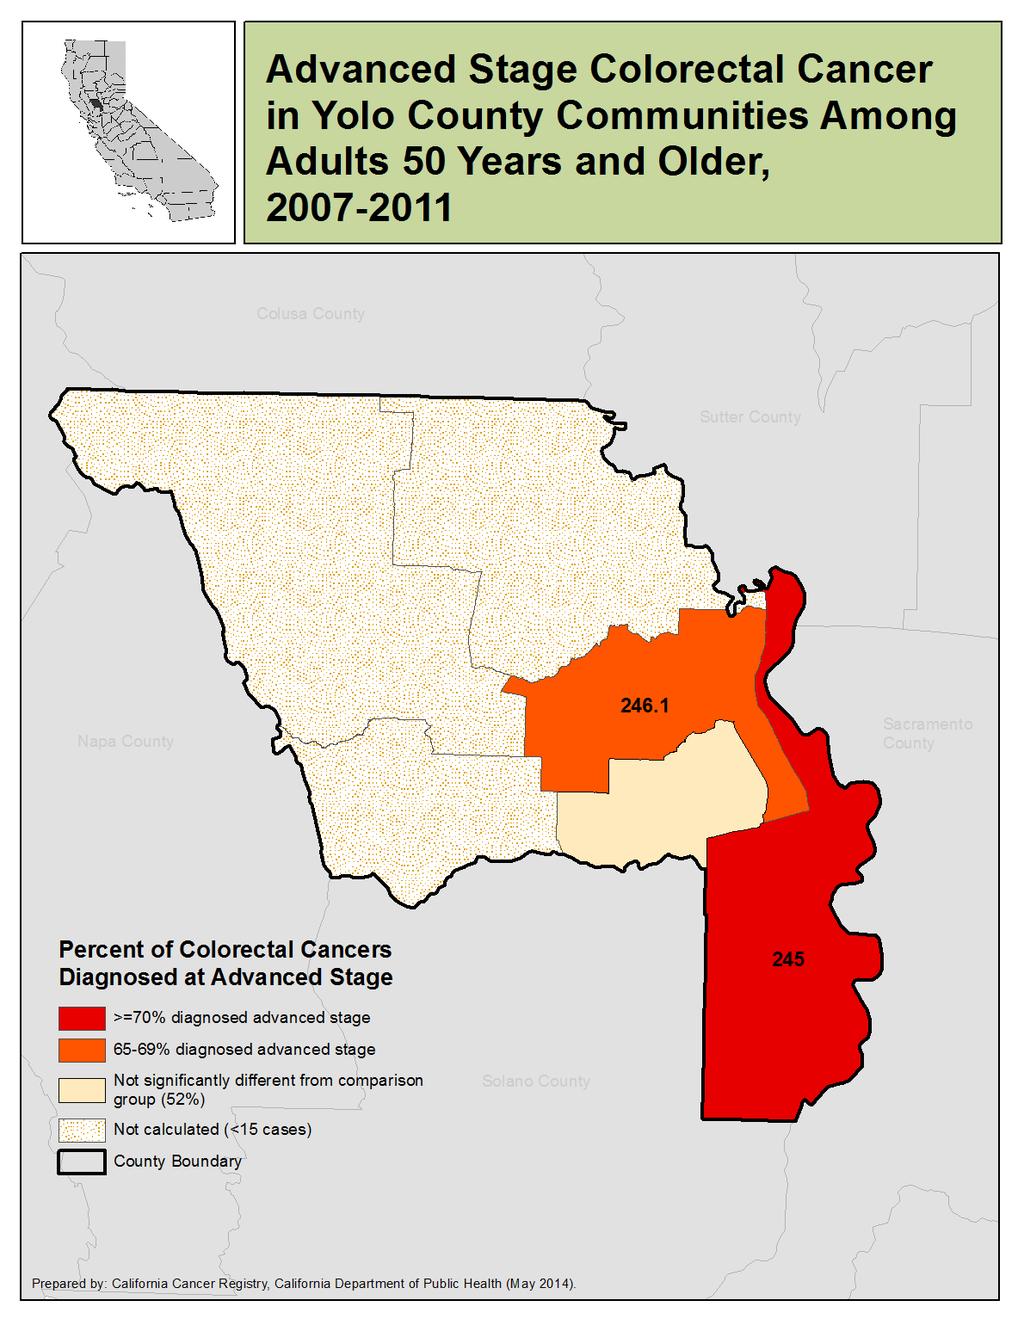 Yolo County: MSSA 245: Bryte/ Broderick/Clarksburg/ Riverview/West Sacramento 81 total cases 57 advanced stage cases 70% advanced